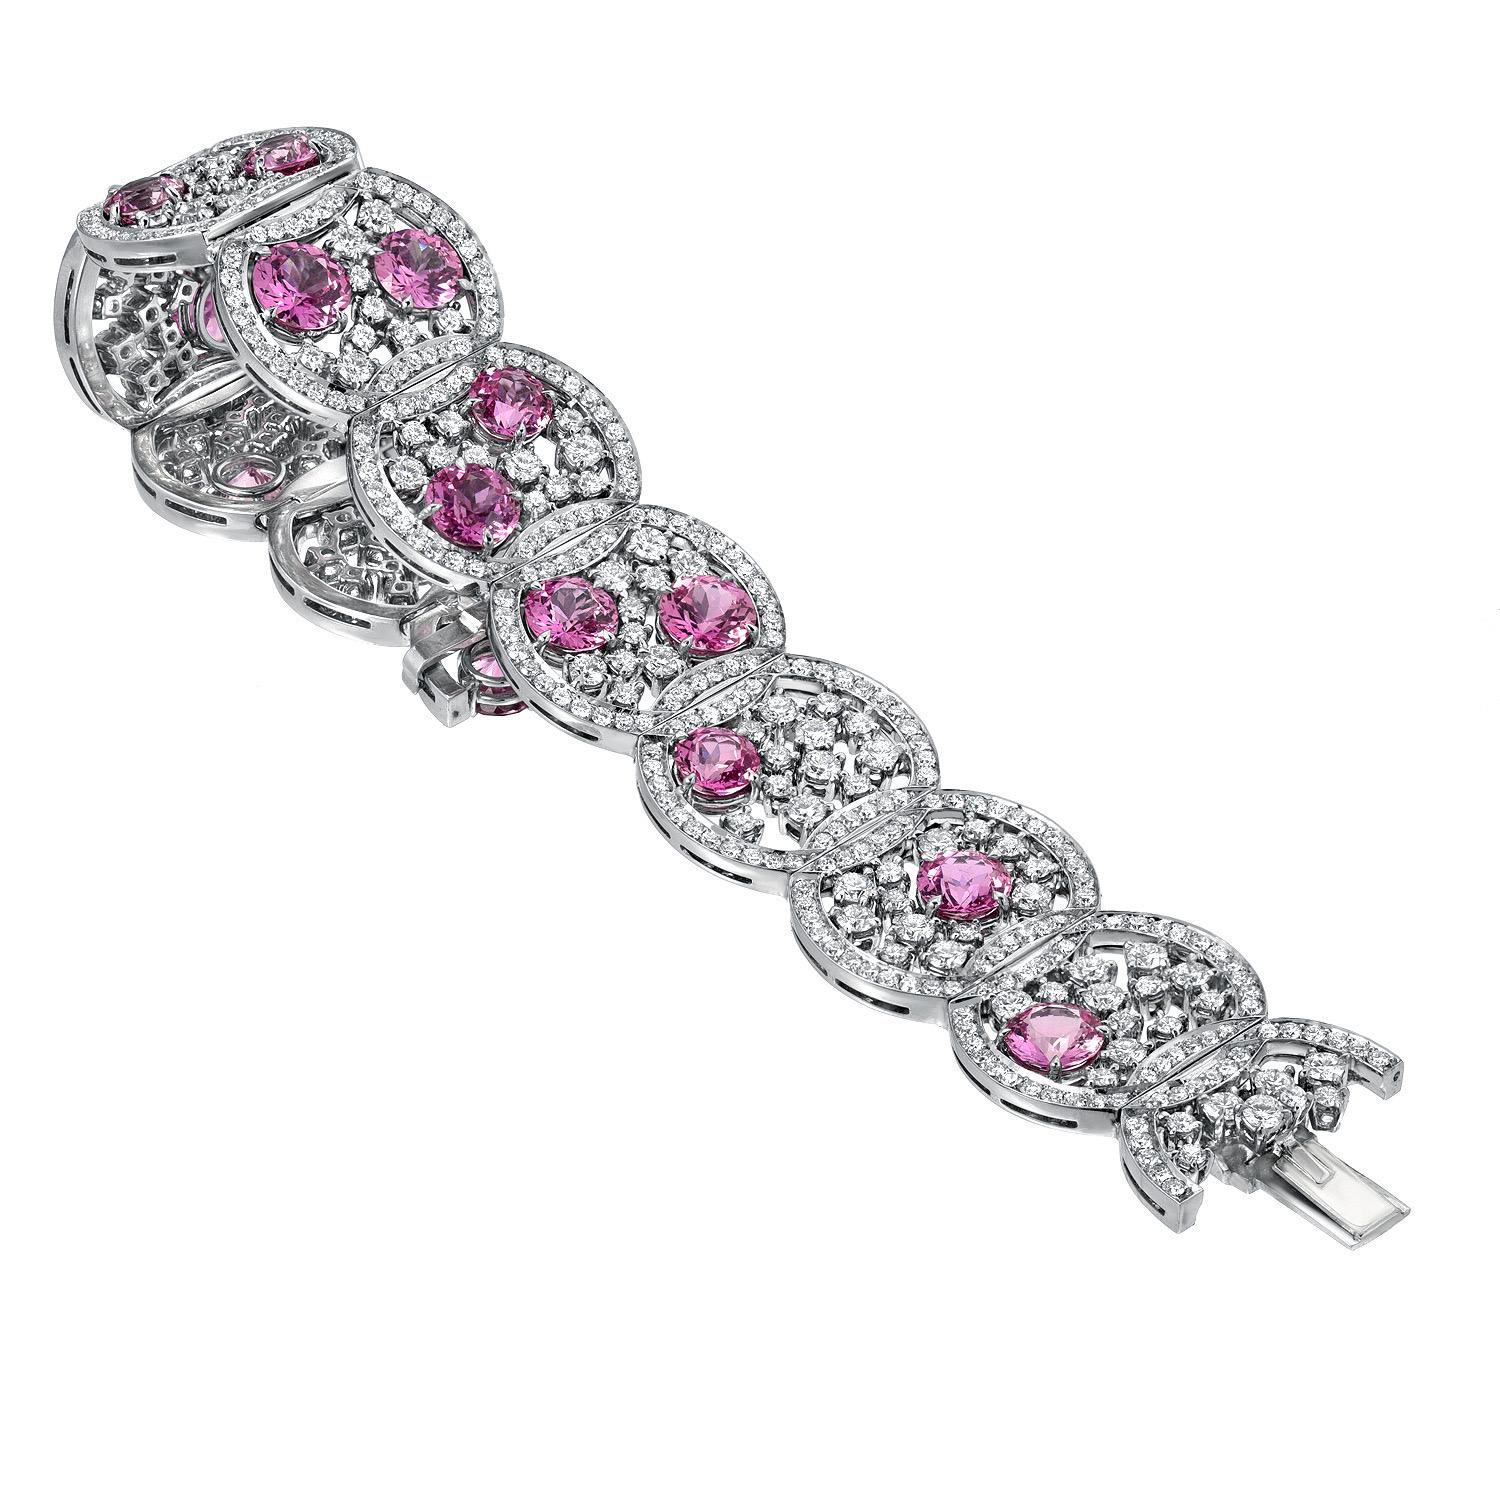 Exceptional platinum bracelet, set with 15 ultra fine round Pink Sapphires, weighing a total of 19.54 carats, and round brilliant diamonds weighing a total of 10.99 carats.
Total length: 7 inches.
Total width: 1.75 inches.
Returns are accepted and